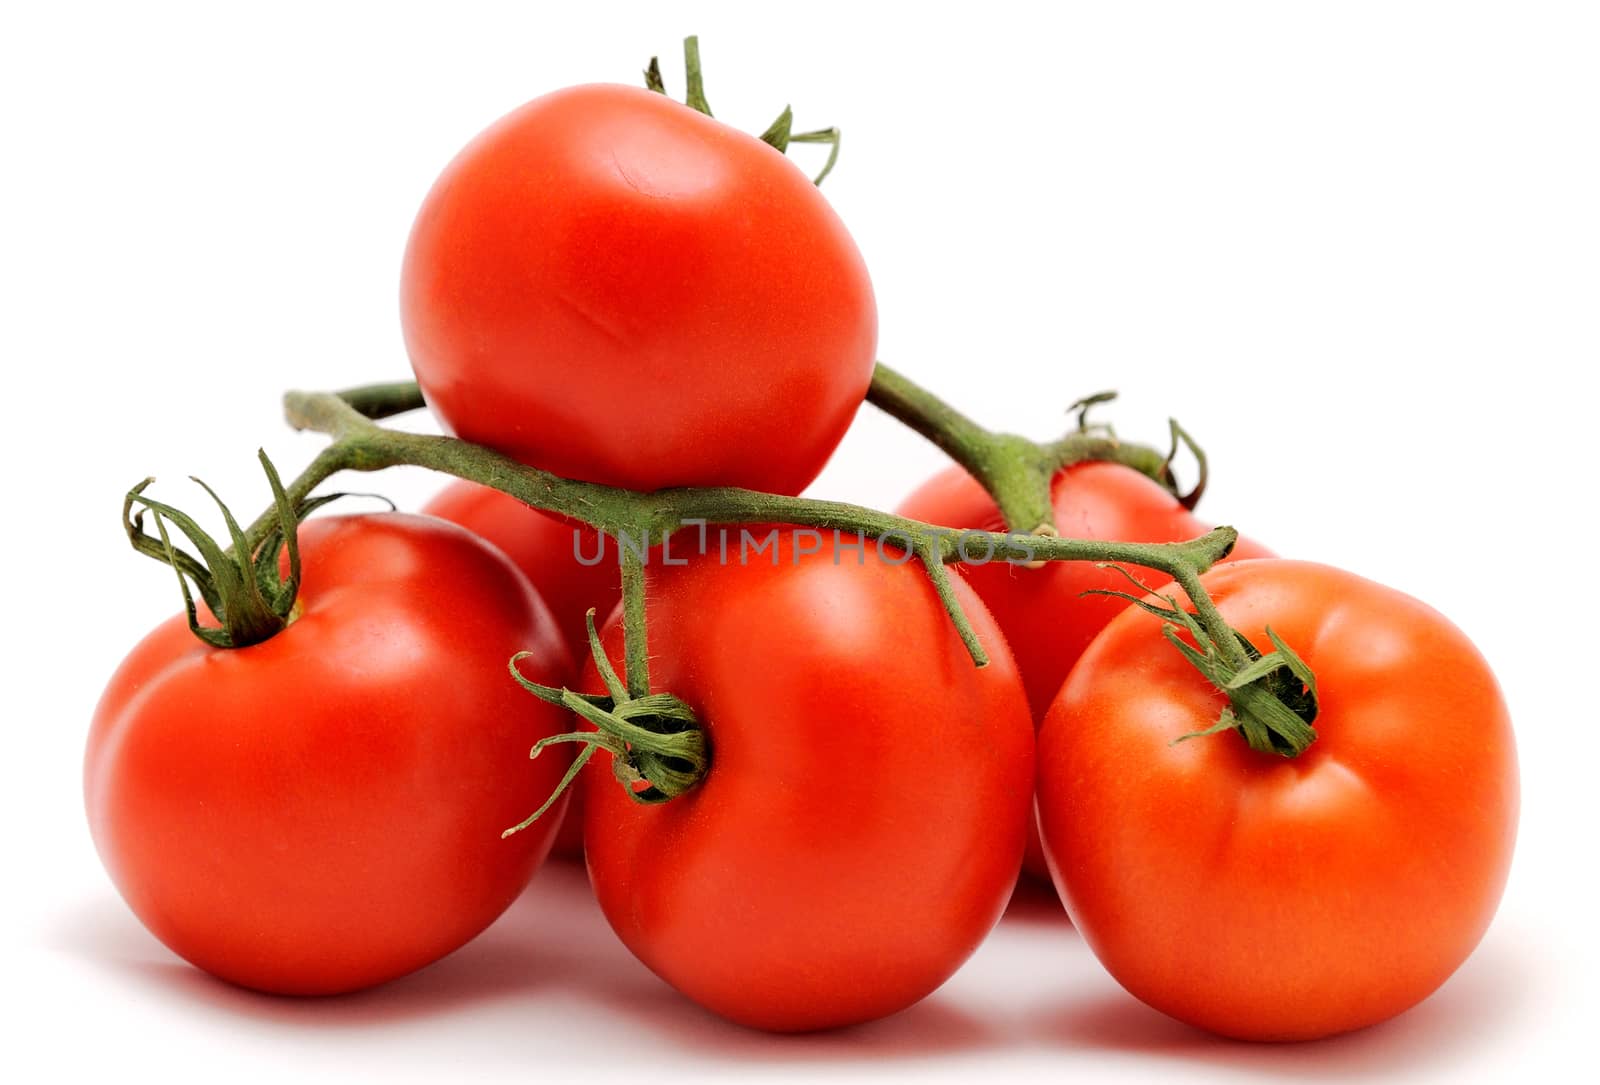 Bunch of fresh red tomatoes, placed on the white background.